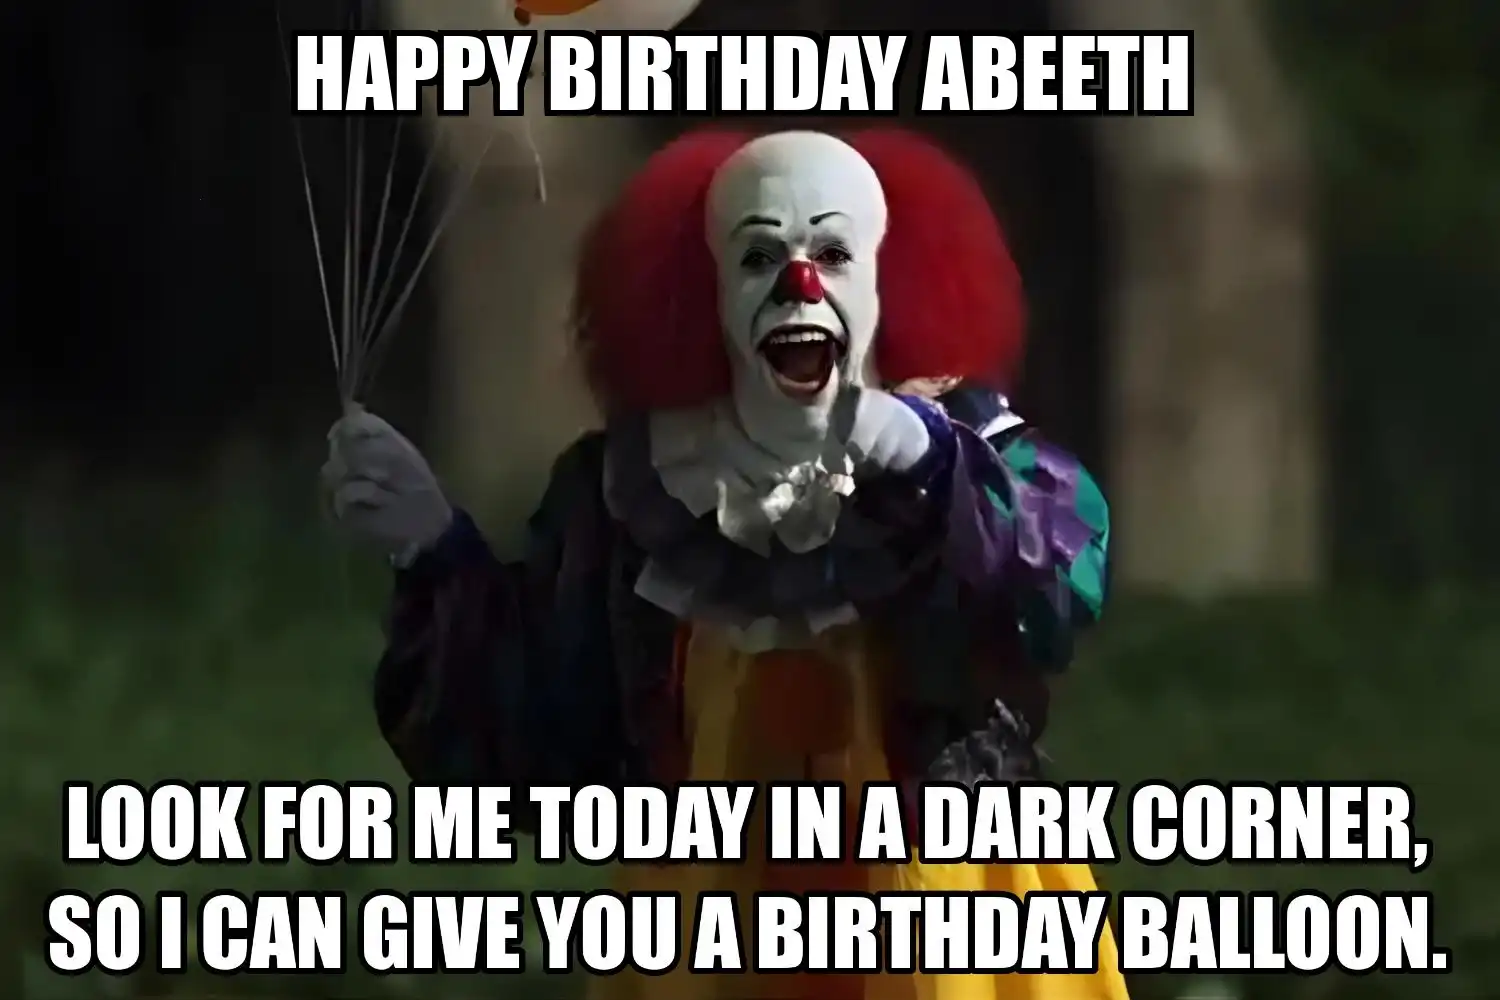 Happy Birthday Abeeth I Can Give You A Balloon Meme